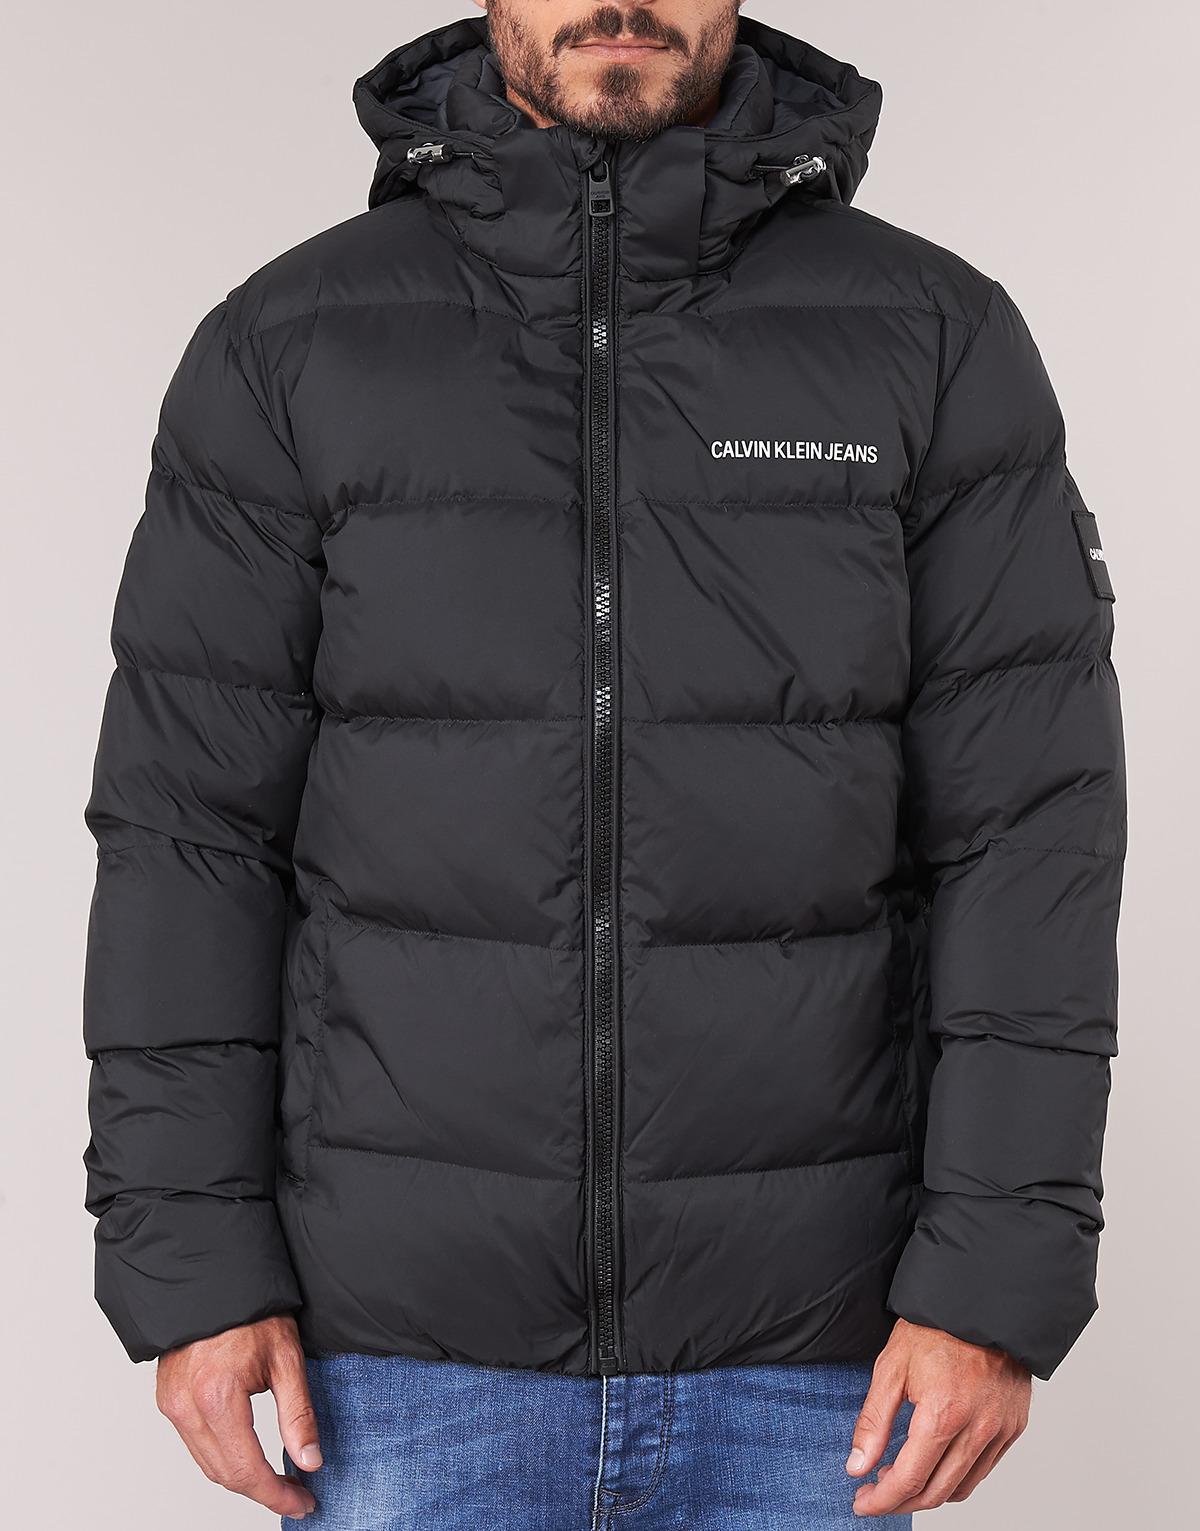 calvin klein jeans hooded down jacket black for Sale OFF 71%